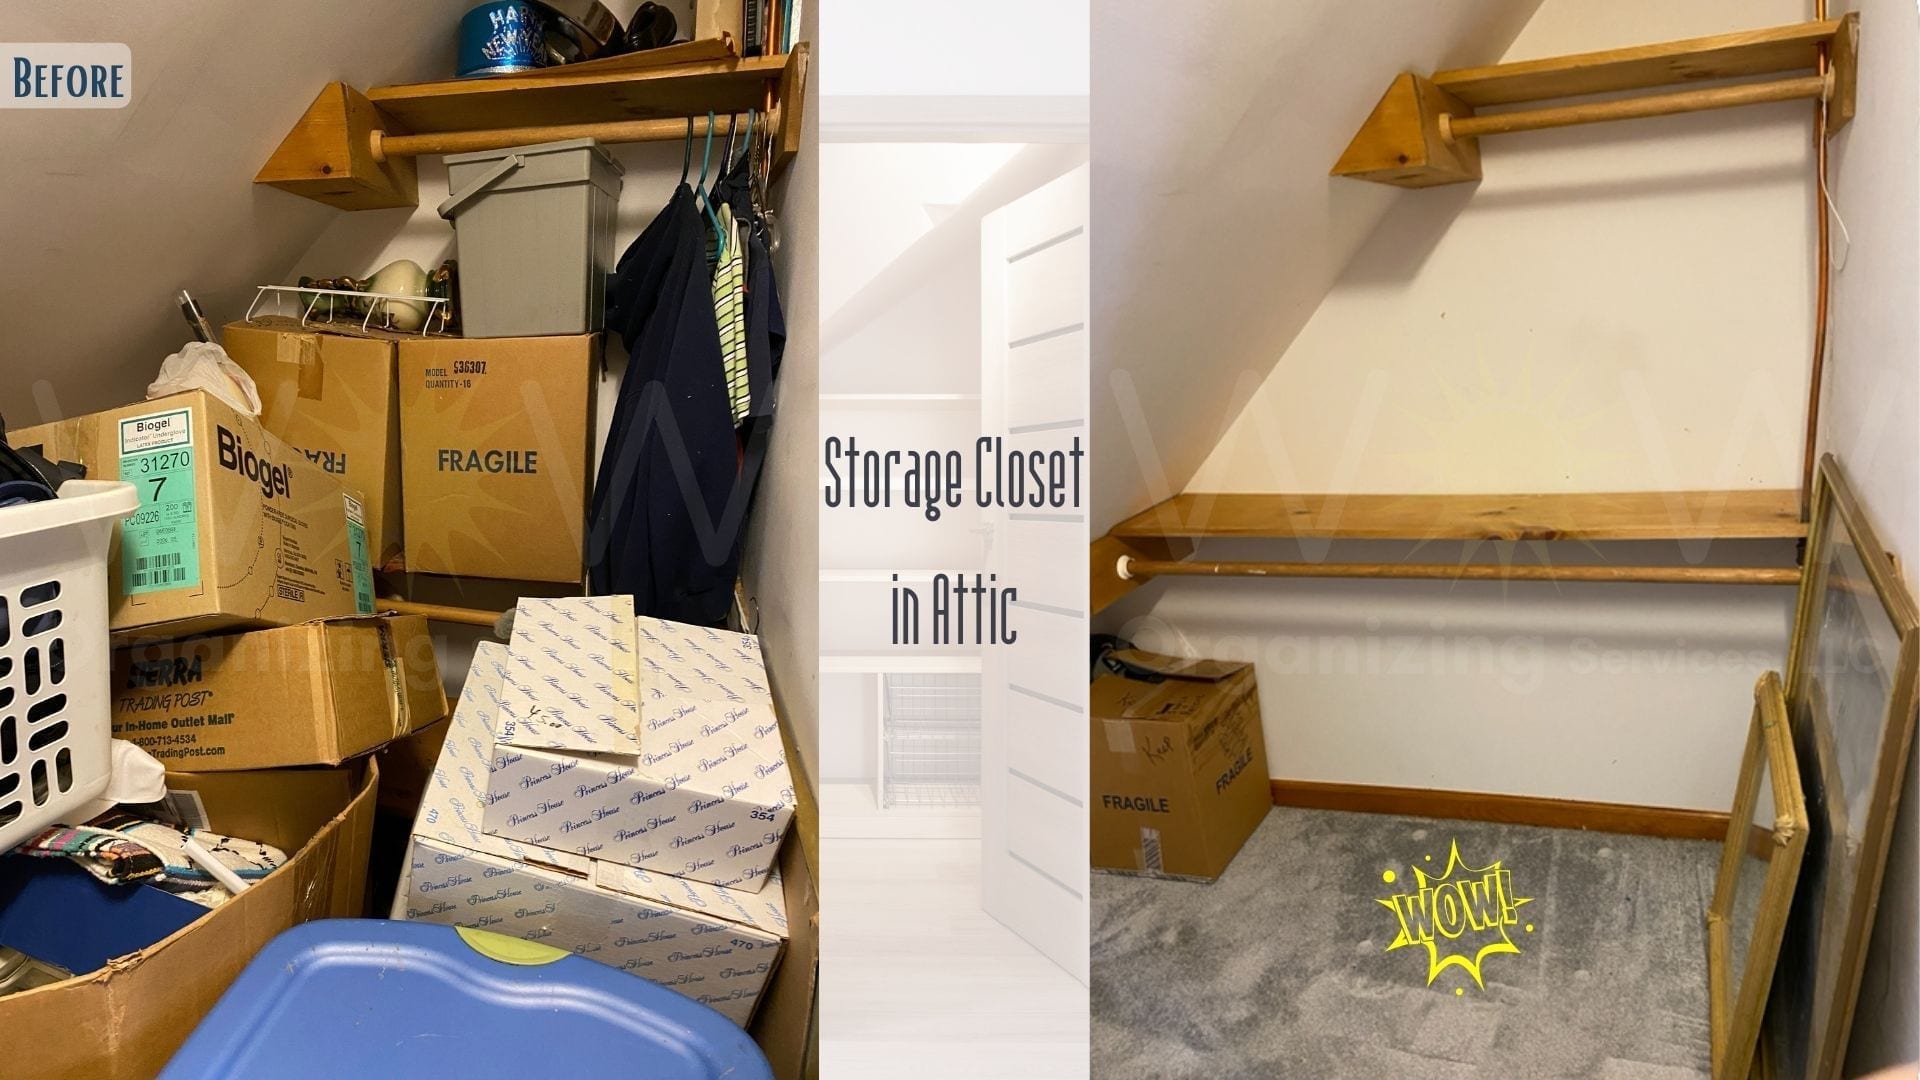 attic storage closet decluttered and organized